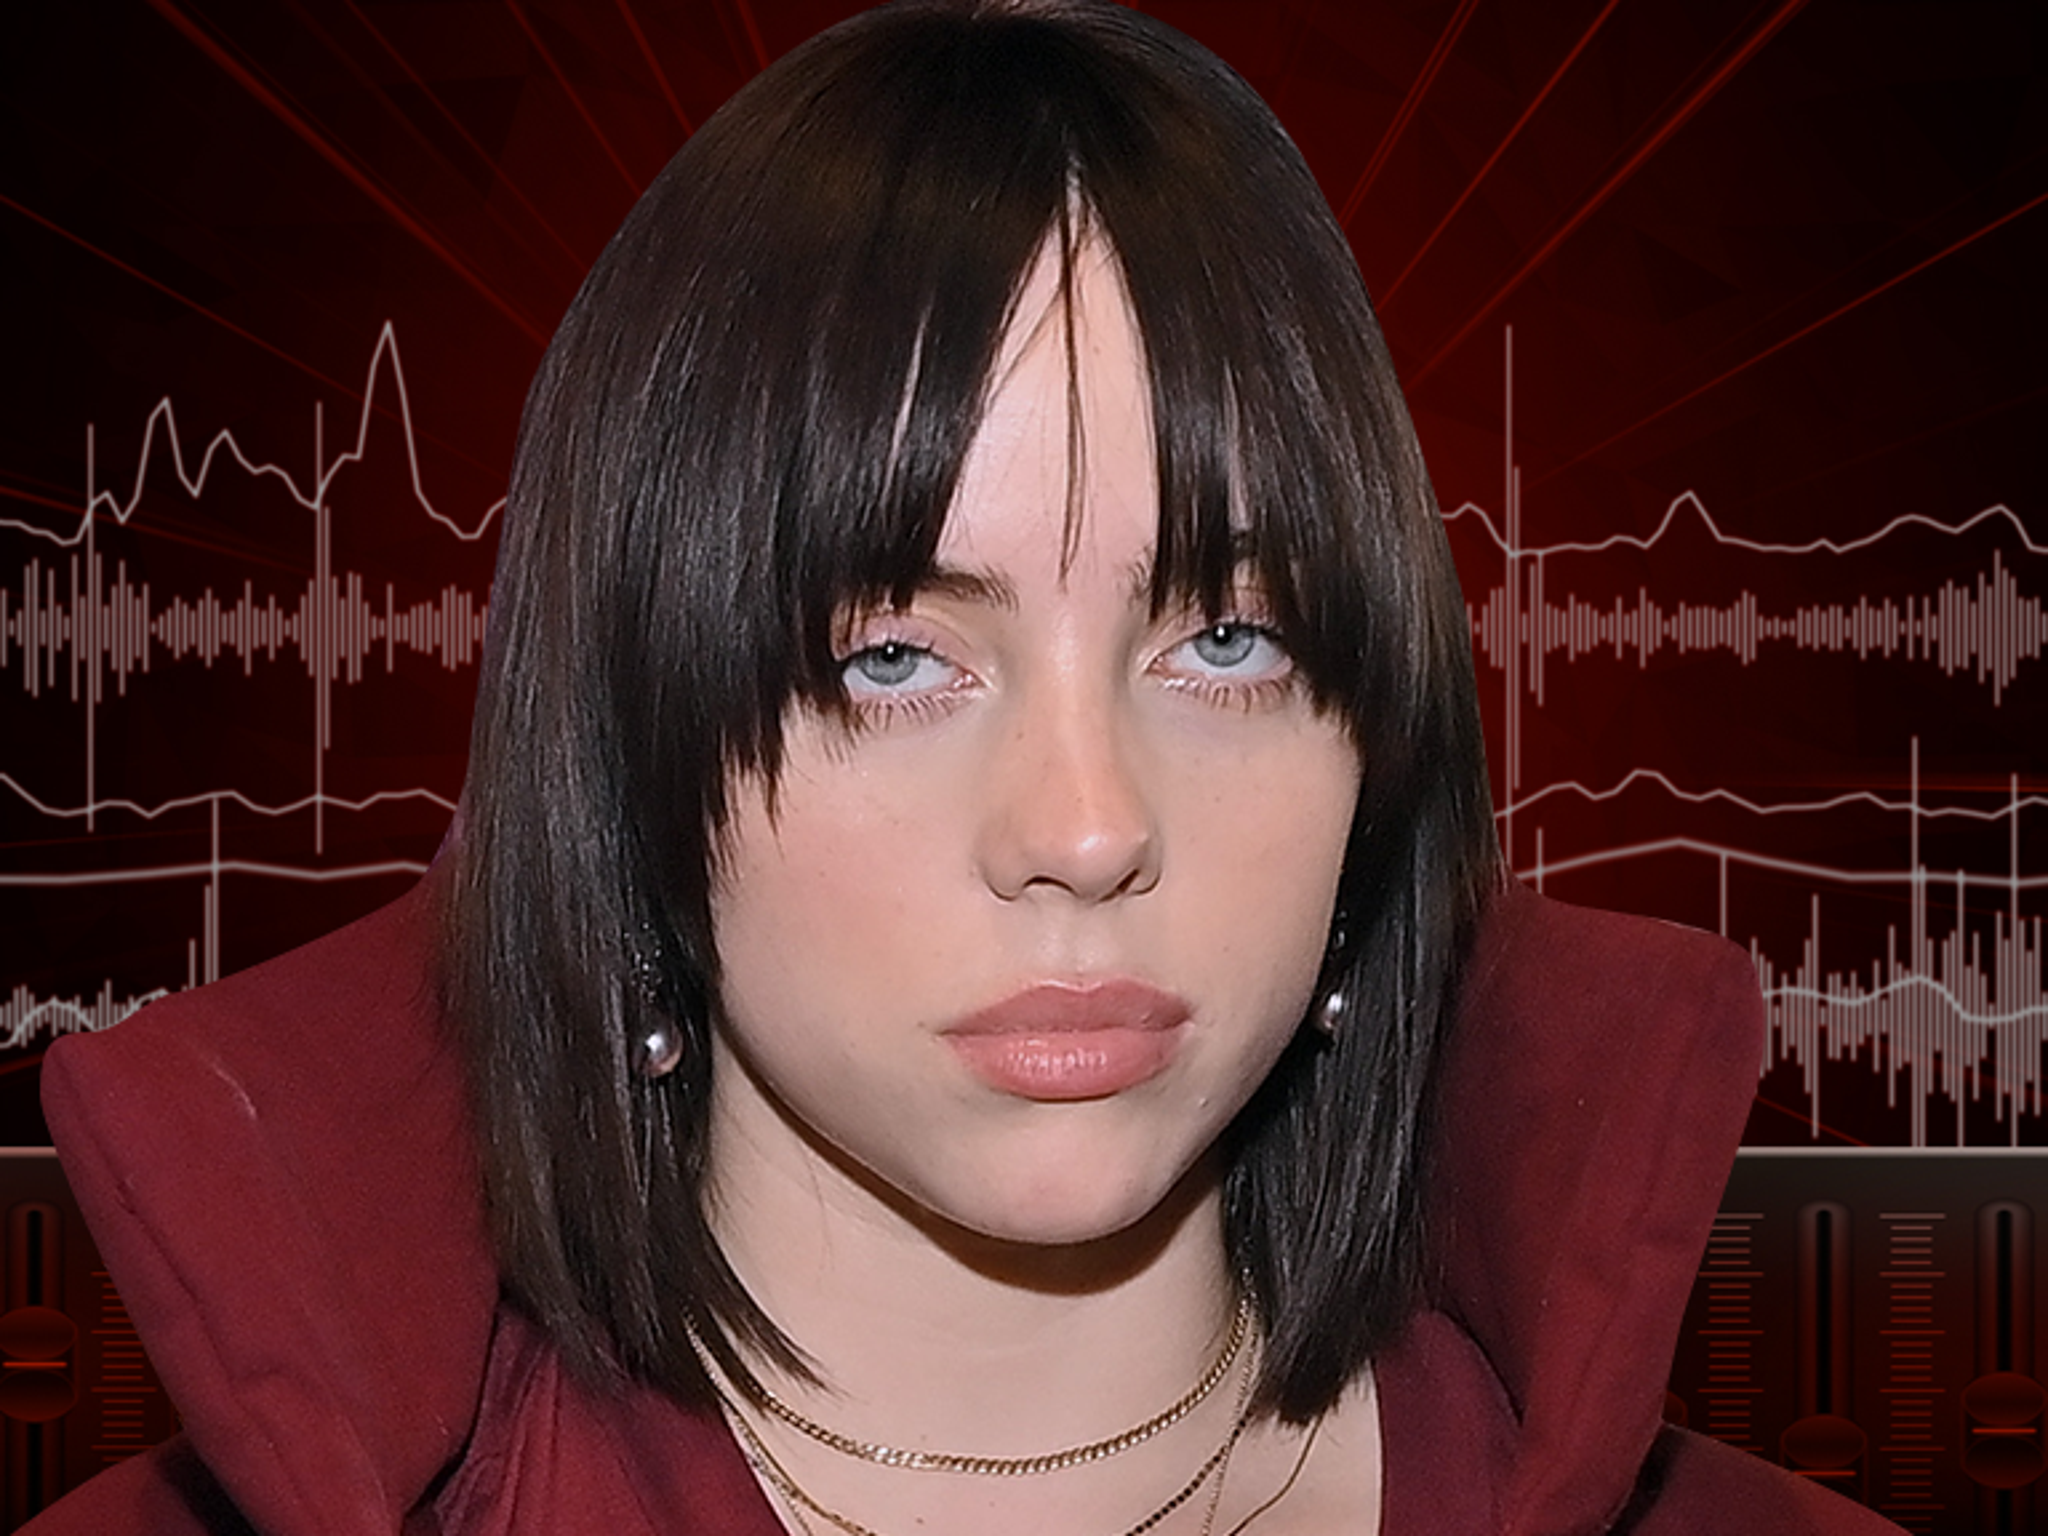 Xxx Sexy Movie Eye Twelve - Billie Eilish Says She Started Watching Porn at 11, Calls it 'Disgrace'